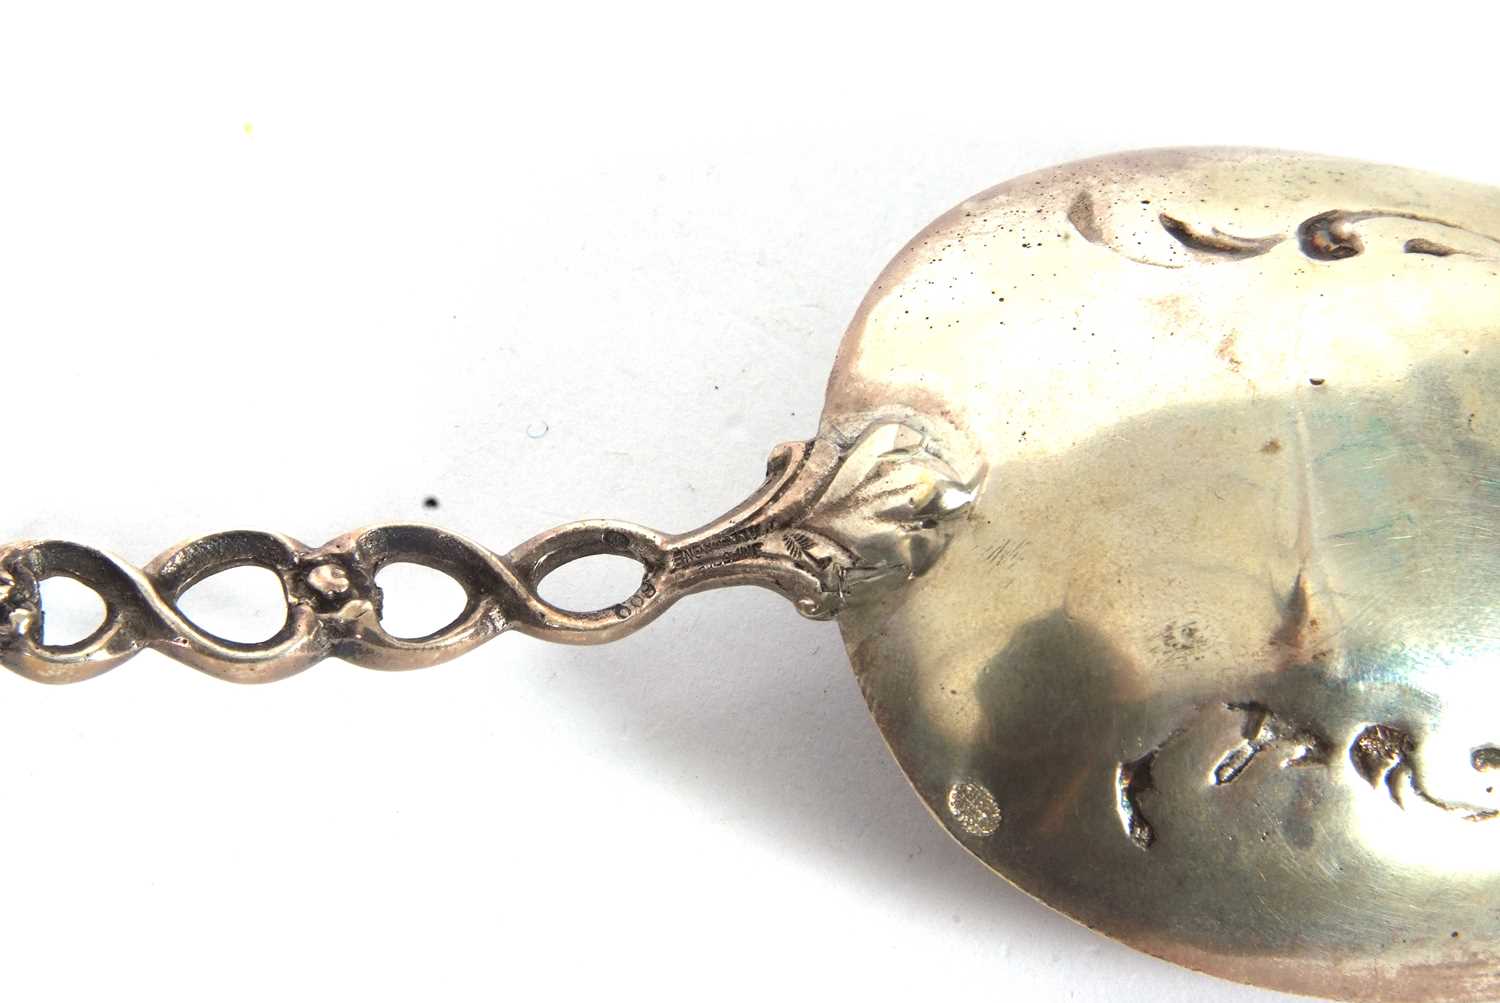 Large French antique Napoleon souvenir spoon, the terminal with a cast model figure of Napoleon - Image 7 of 8